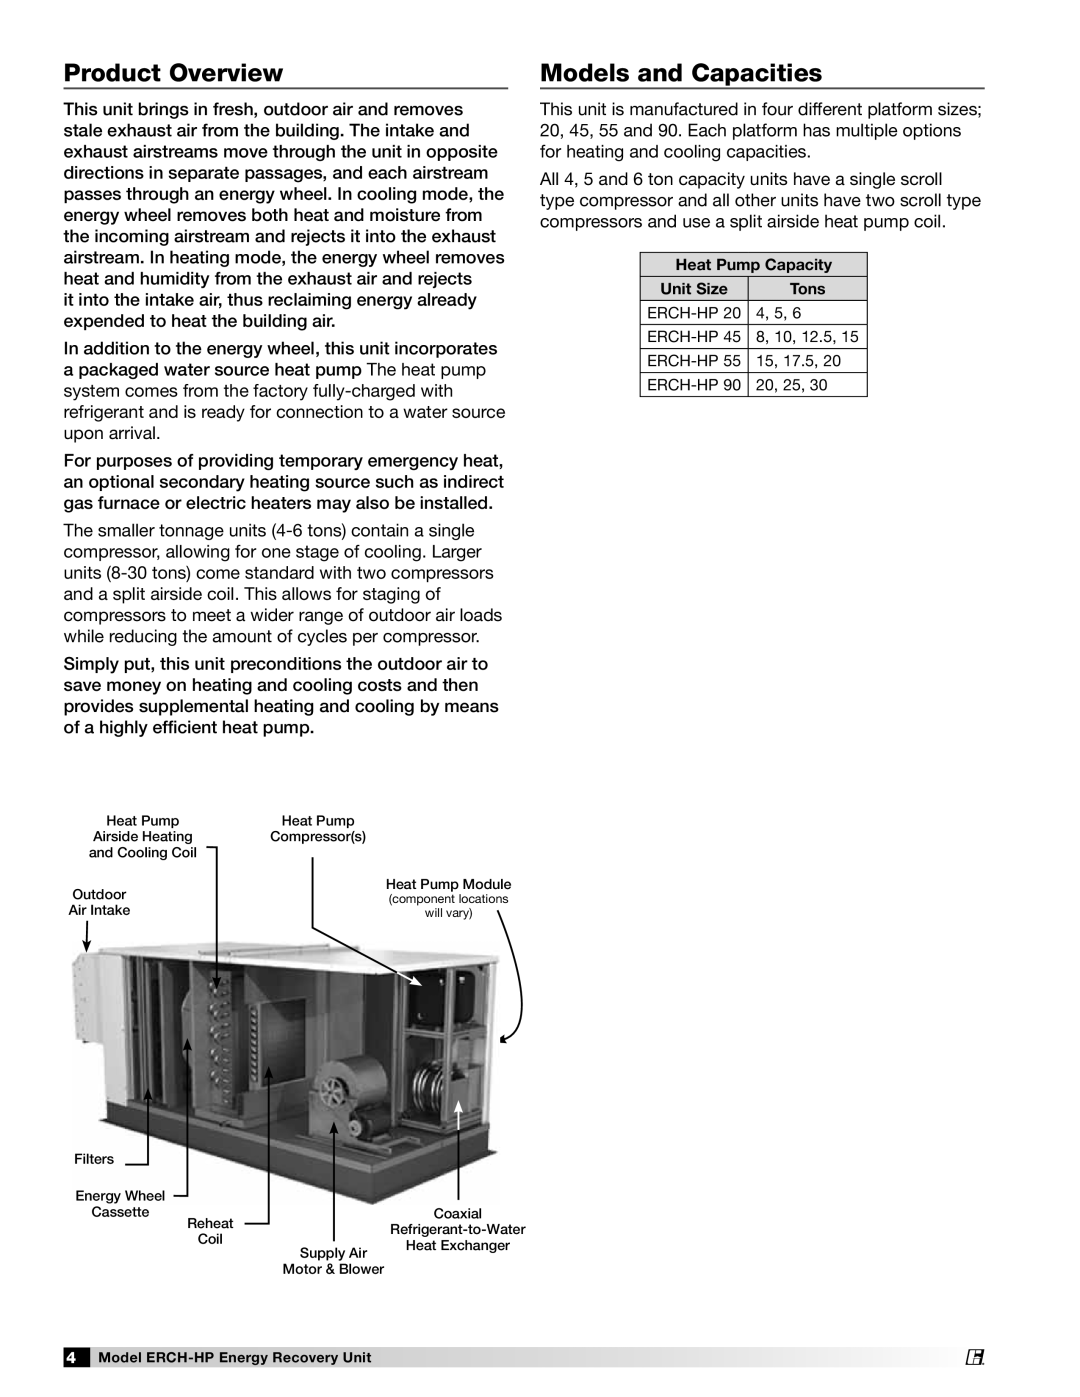 Greenheck Fan 473501 manual Product Overview, Models and Capacities, Heat Pump Capacity, Unit Size, Tons 